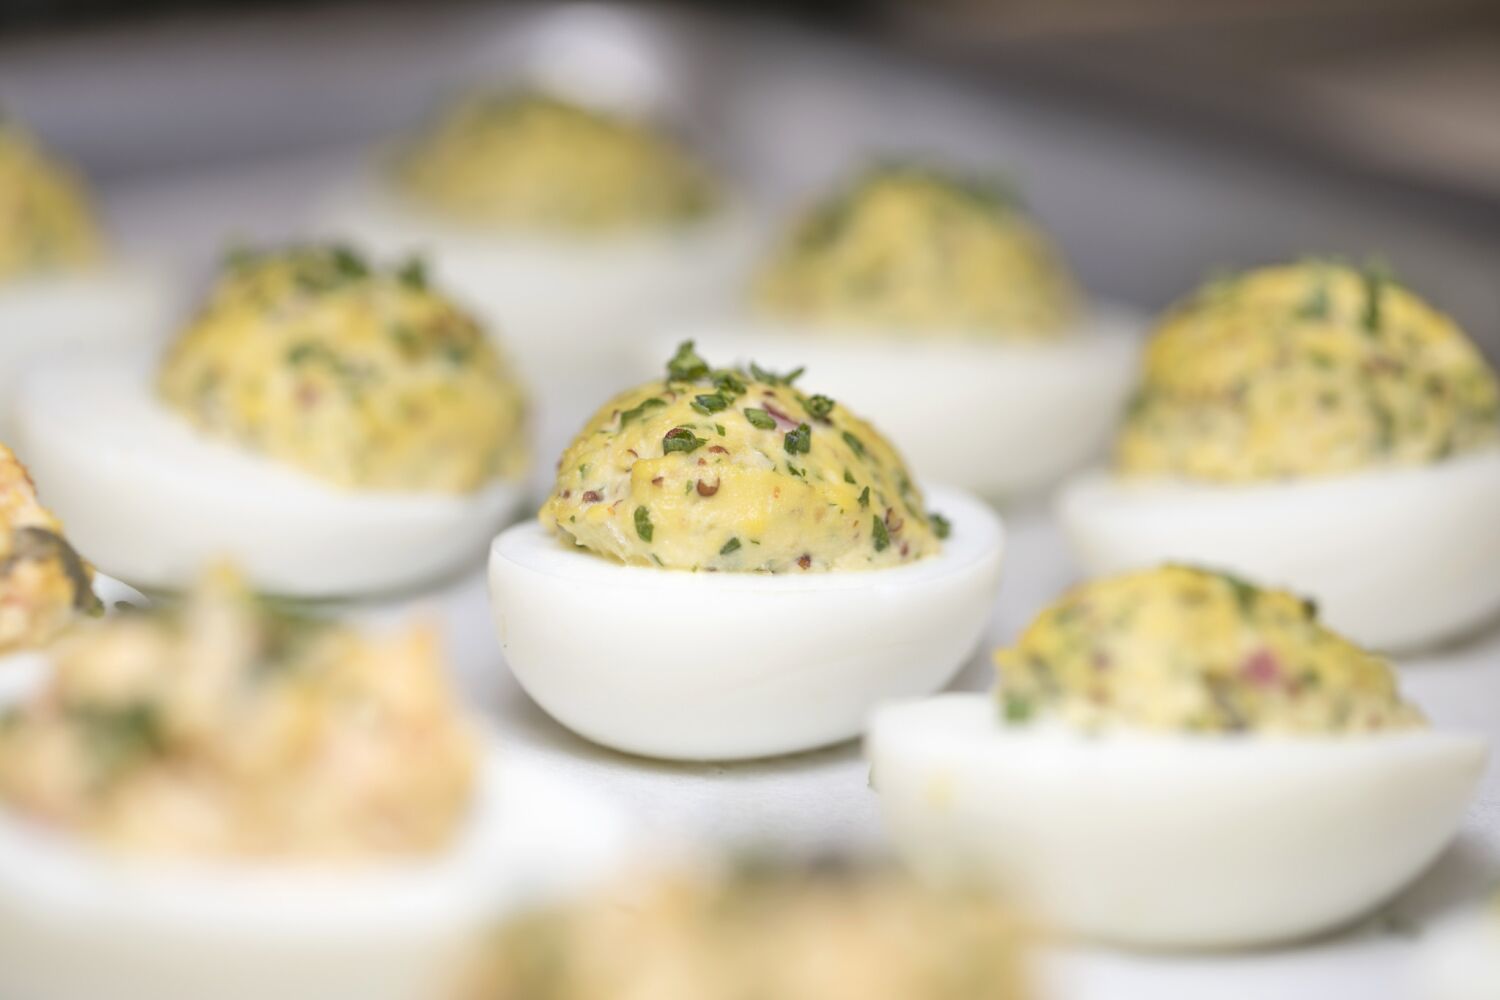 Leftover boiled eggs from the holidays? Make deviled eggs — it'll be a whole new party